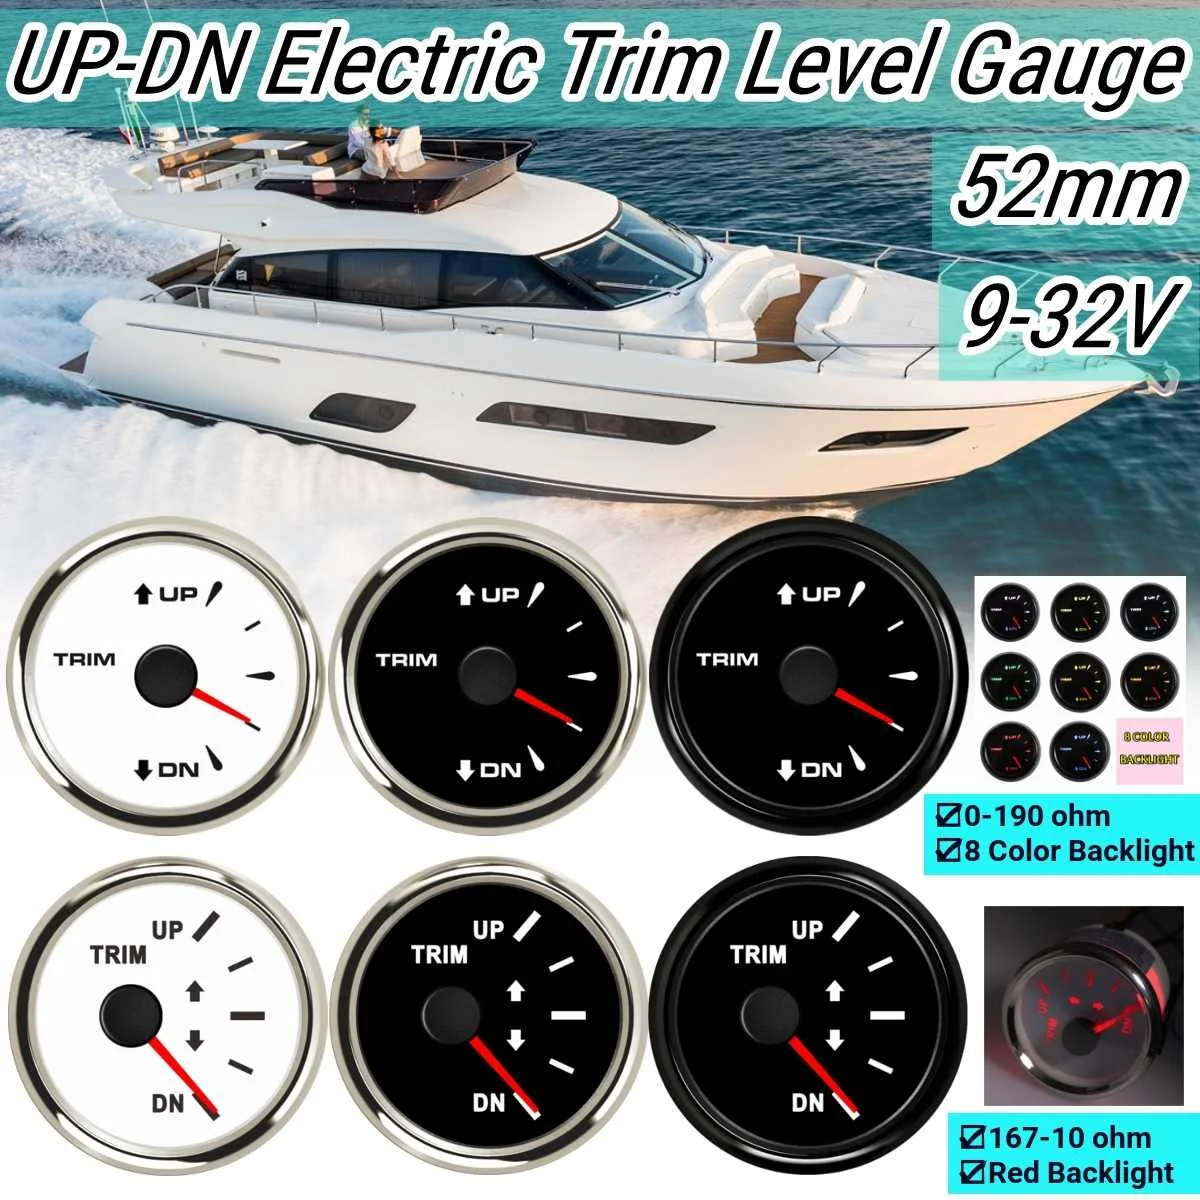 

Marine Boat 52mm UP-DN Electric Trim Level Gauge Outboard Engine 9-32V with Backlights 0-190 ohm/167-10 ohm Fit Yacht Left Right